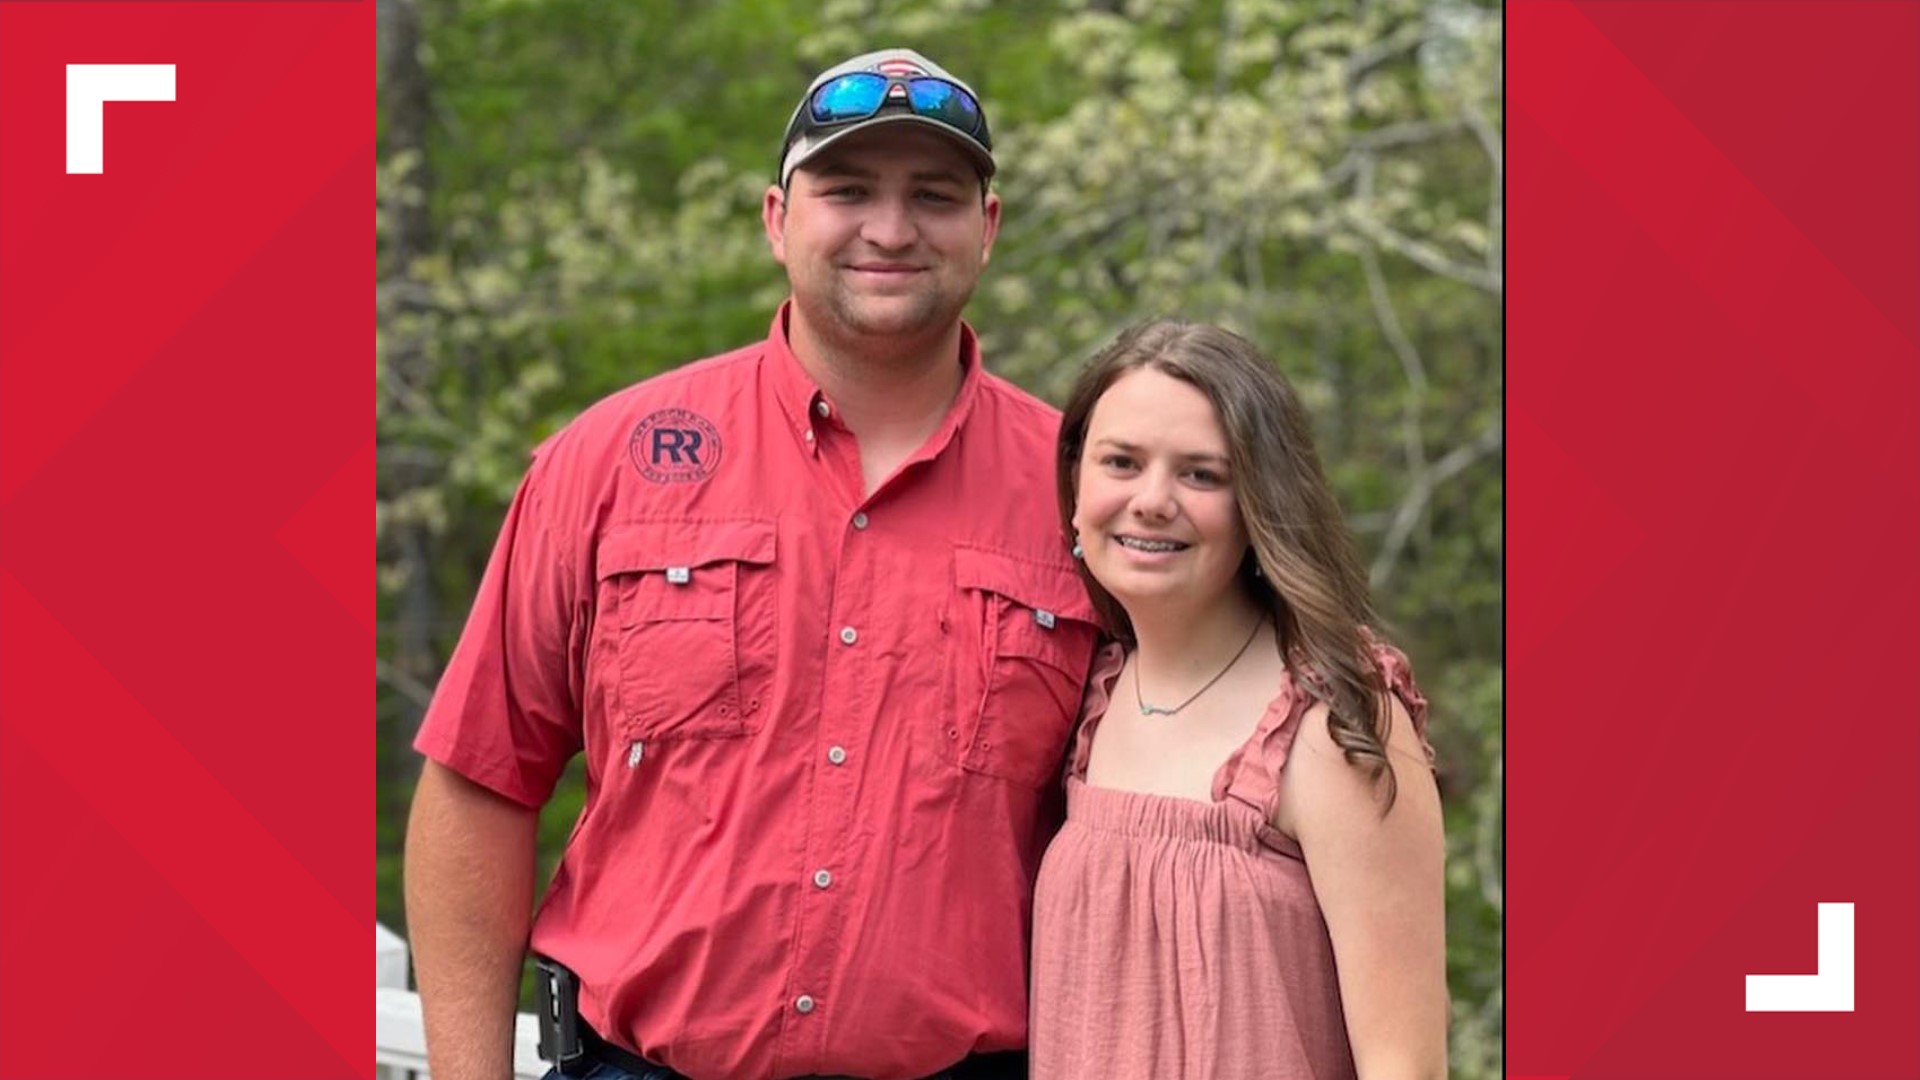 Trista Cheeks and Logan Gordy continue to make their recovery after being ejected from their firetruck.